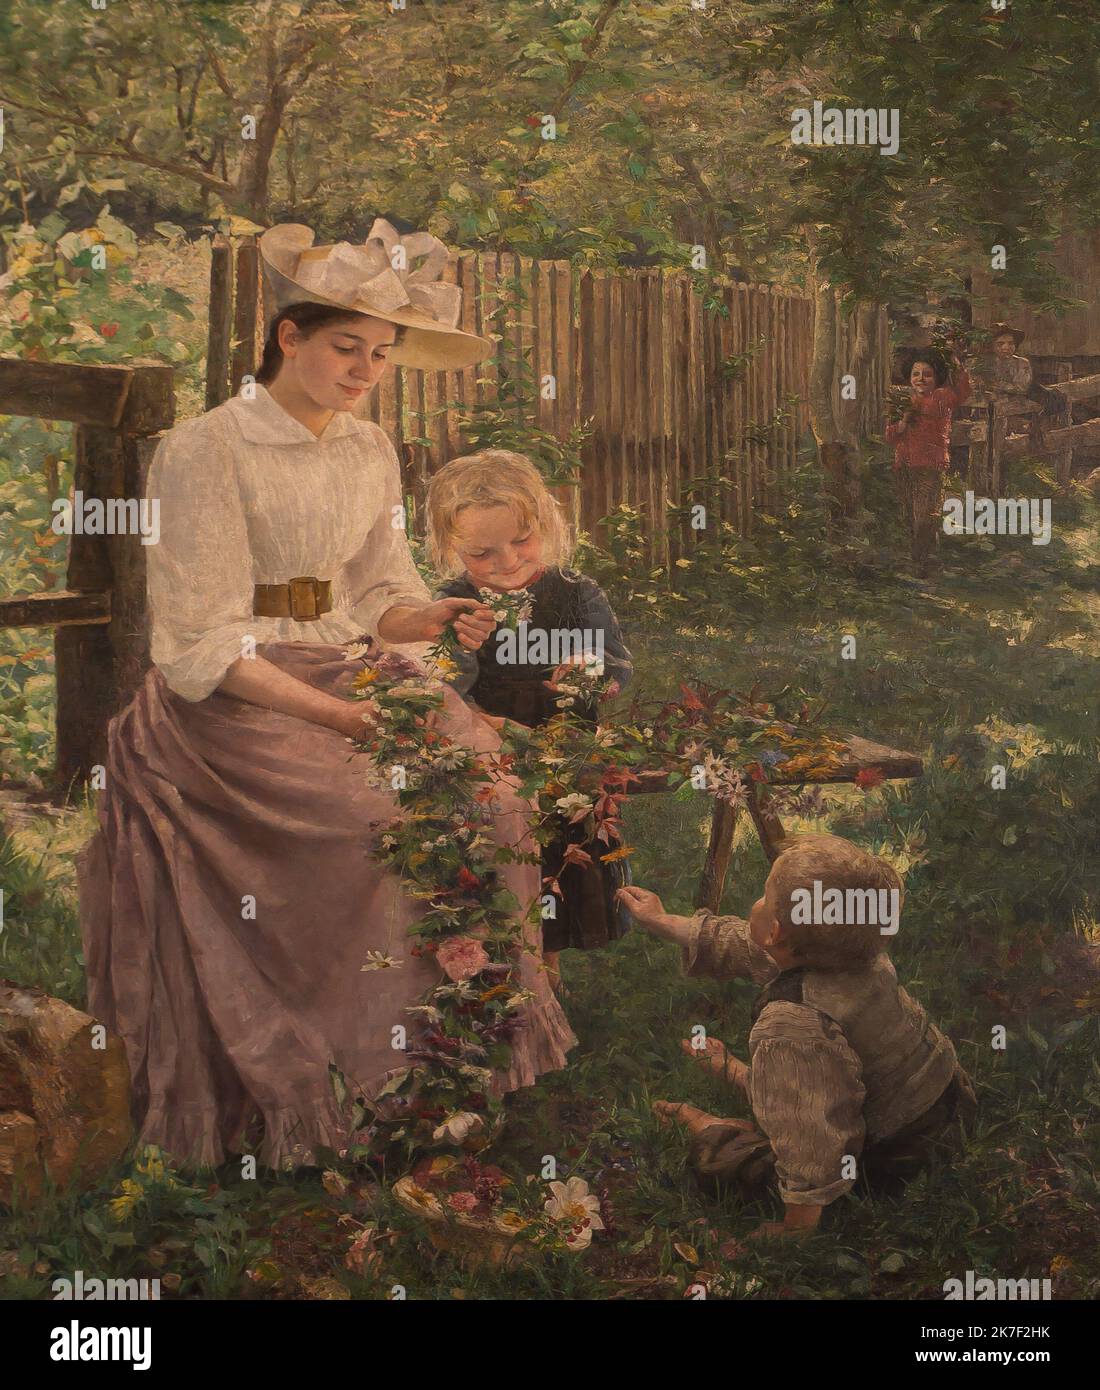 ©Active Museu/MAXPPP - ActiveMuseum 0000065.jpg / L'ete - Ivana Kobilca (1889) - 1889 - / Ivana Kobilca / Peinture Active Museum / Le Pictorium Belt ,Bush ,Child ,Dress ,Fence ,Flower ,Flower necklace ,Forest ,Garden ,Hat ,Kid game ,Knot ,Mother ,Mother and child ,Sitting (to be) ,Slovenian Impressionism ,slovenian impressionists ,Stone ,Summer ,Tree ,Vertical ,Woman ,19th century ,Ivana Kobilca ,Painting ,  Stock Photo